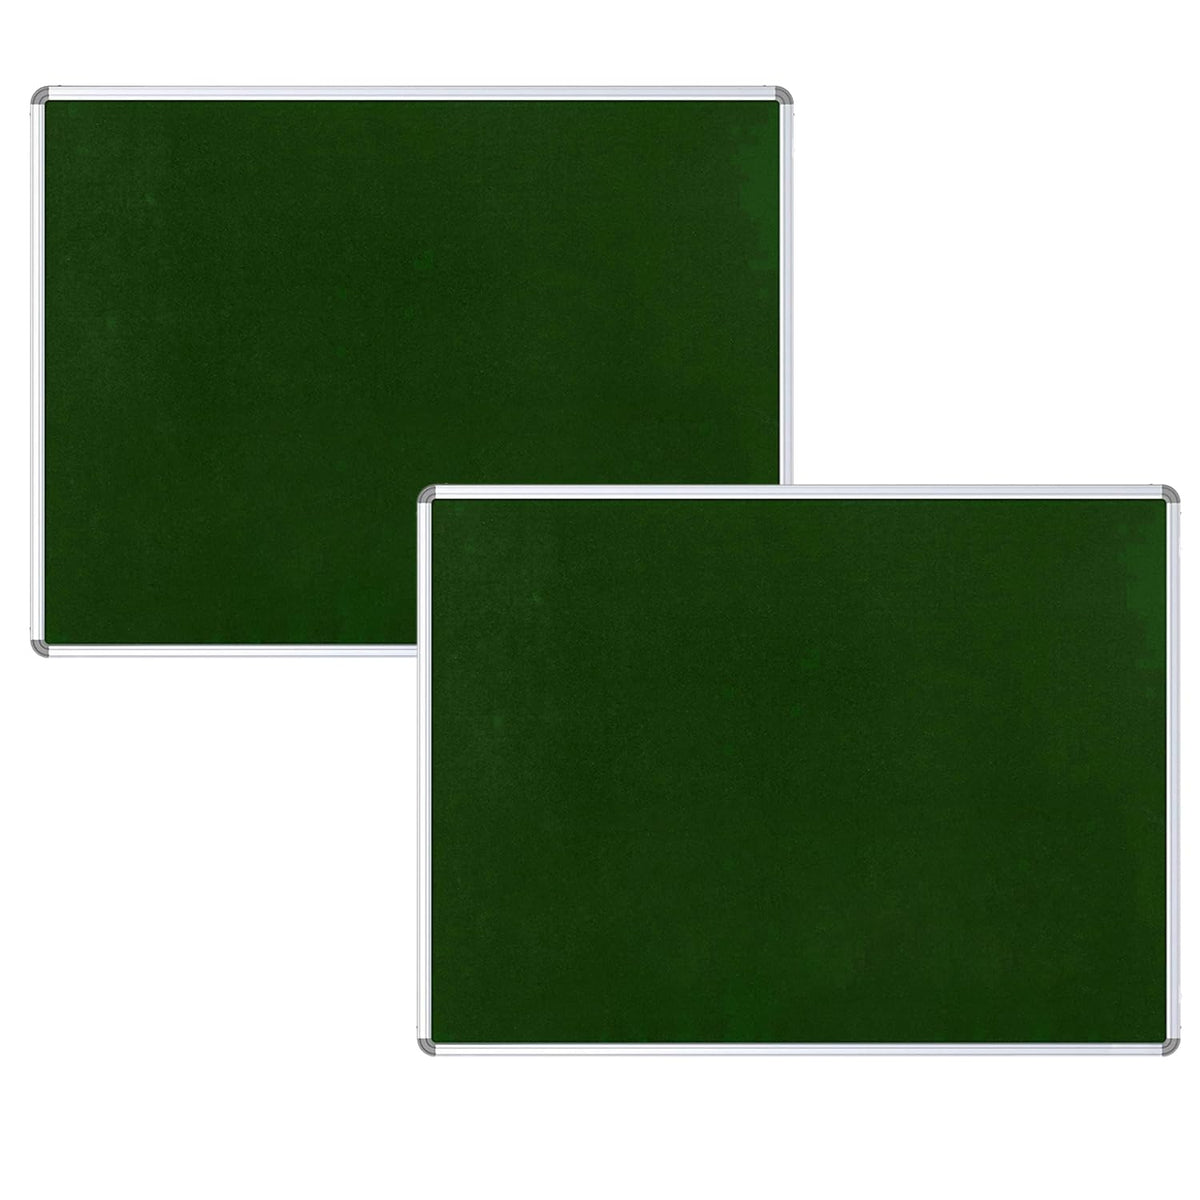 Kuber Industries- Pin-Up Board- 1.5 x 2 Feet-Pack of 2 (Green)